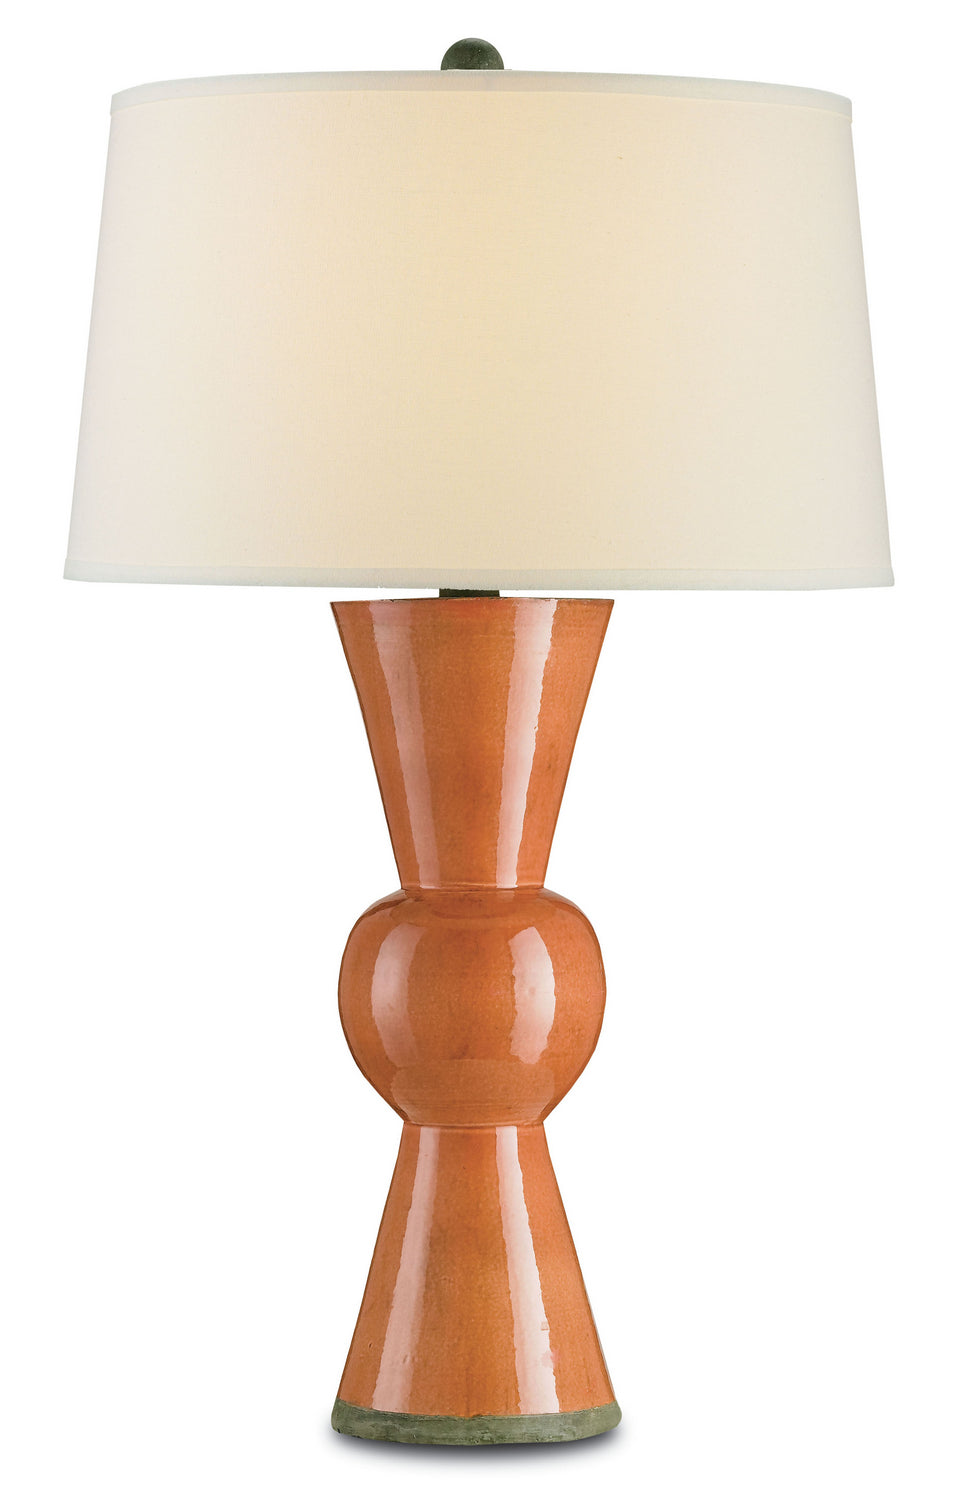 One Light Table Lamp from the Upbeat collection in Orange finish